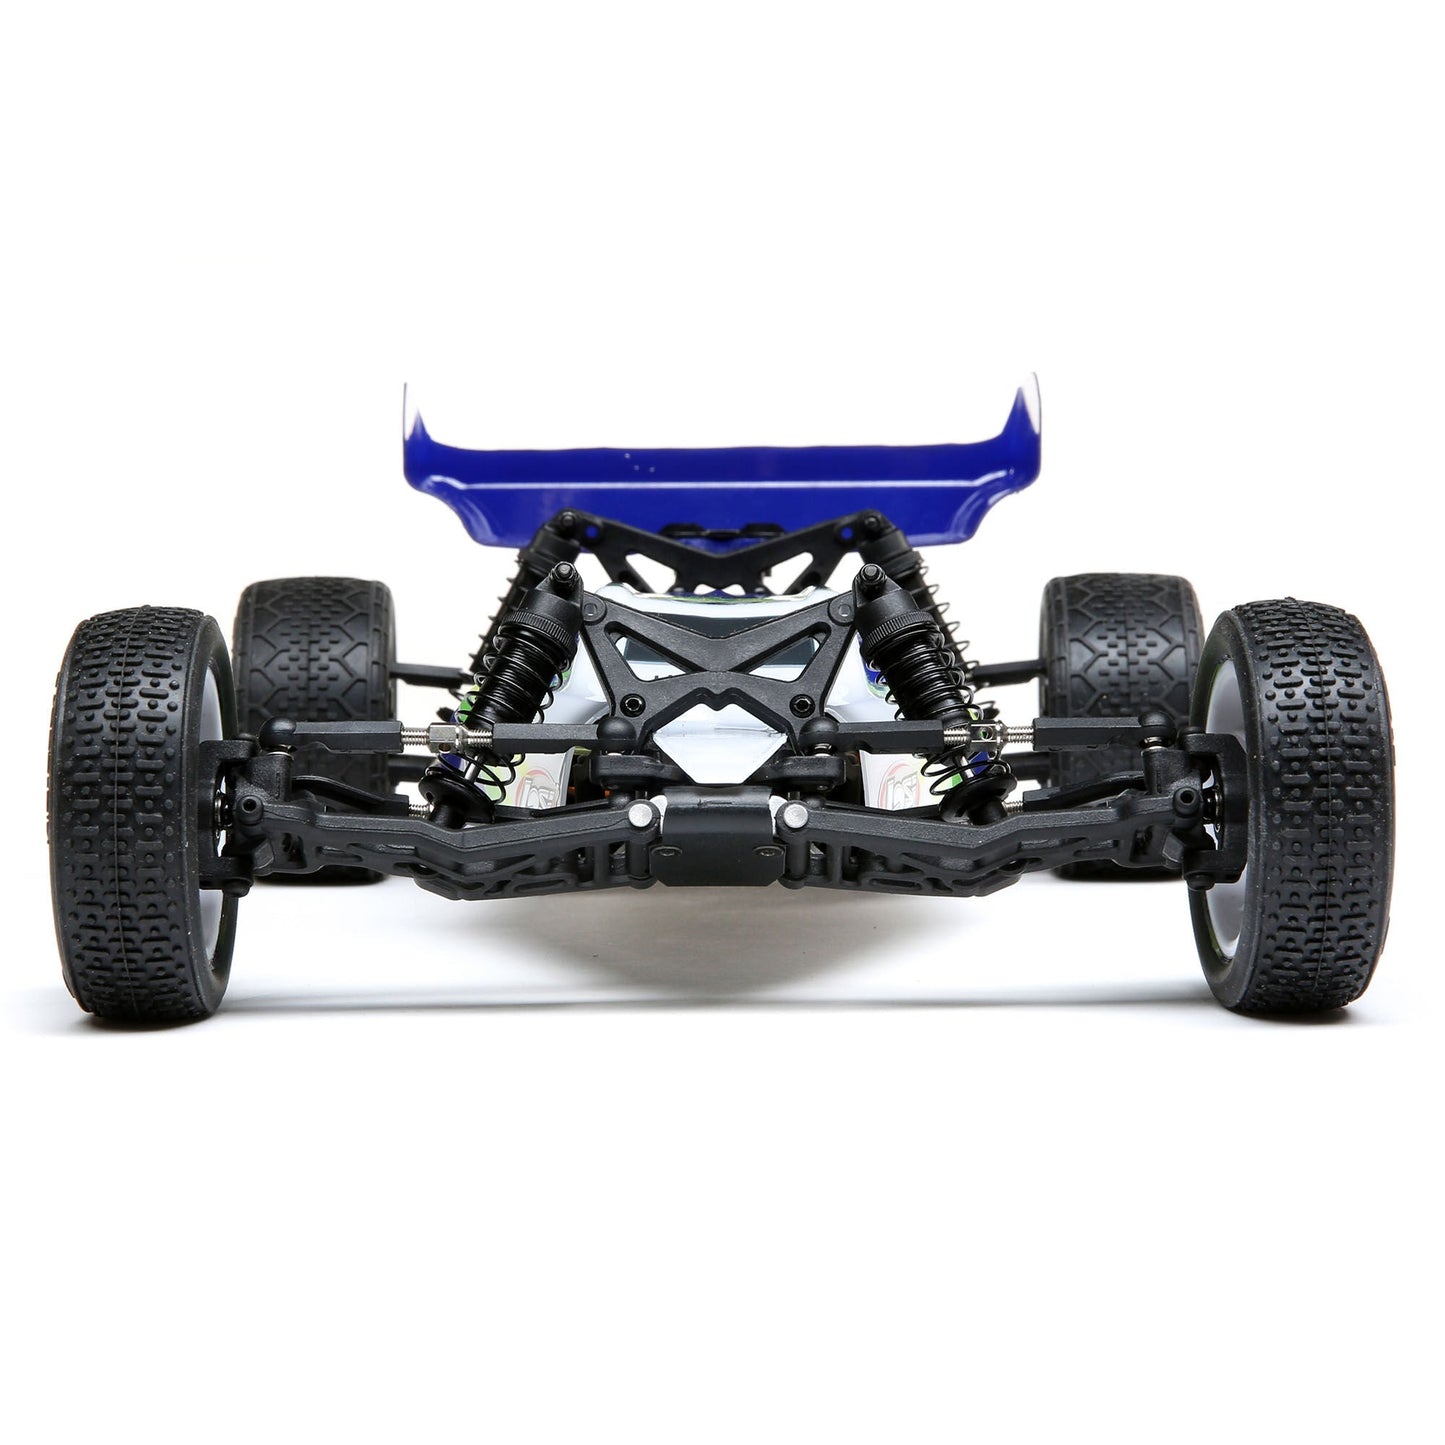 Losi LOS01016T1 Mini-B Brushed 1/16 2WD Buggy, Blue/White